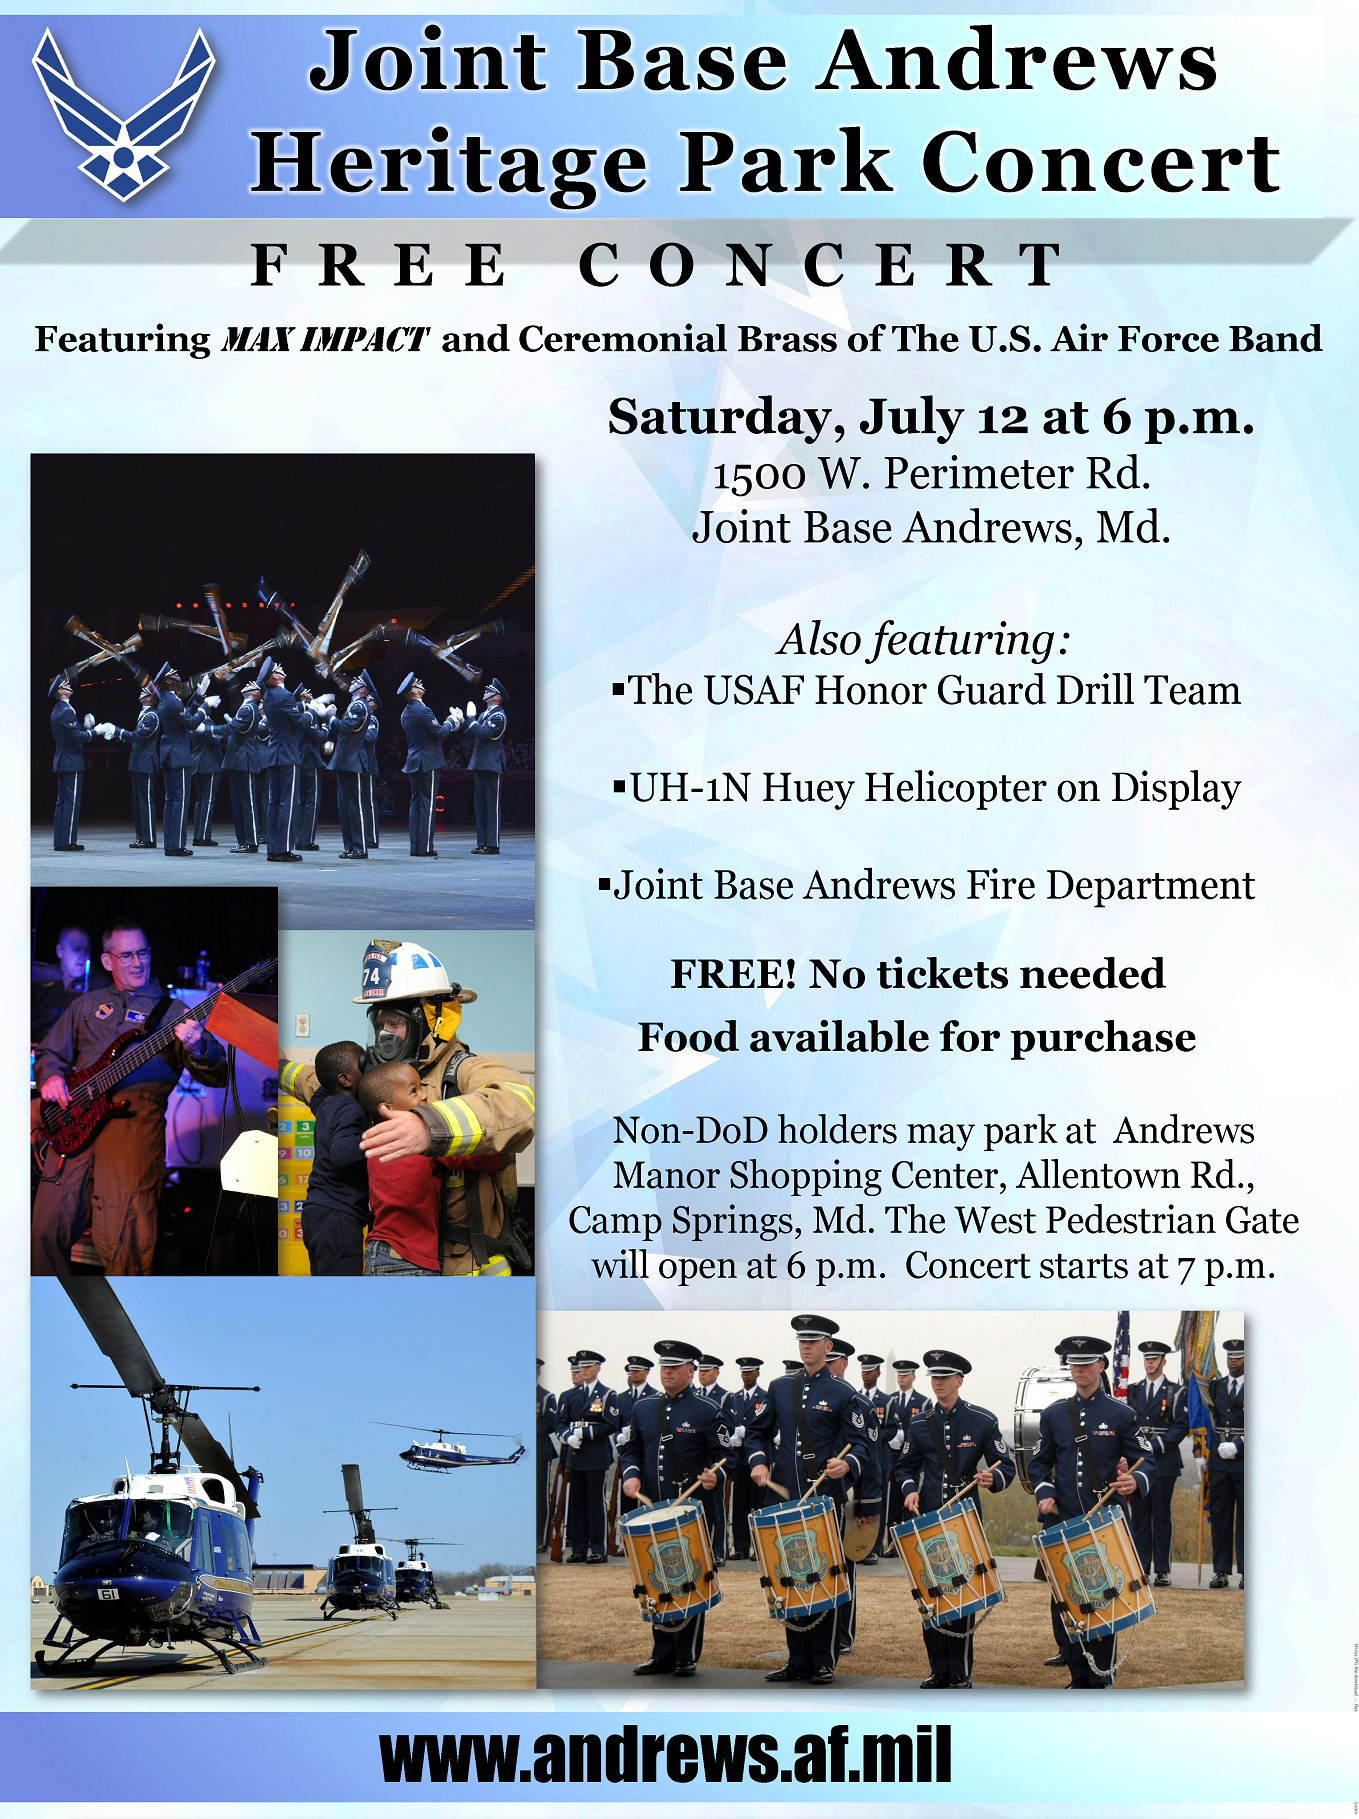 JBA Heritage Park to host concert > Joint Base Andrews > Article Display